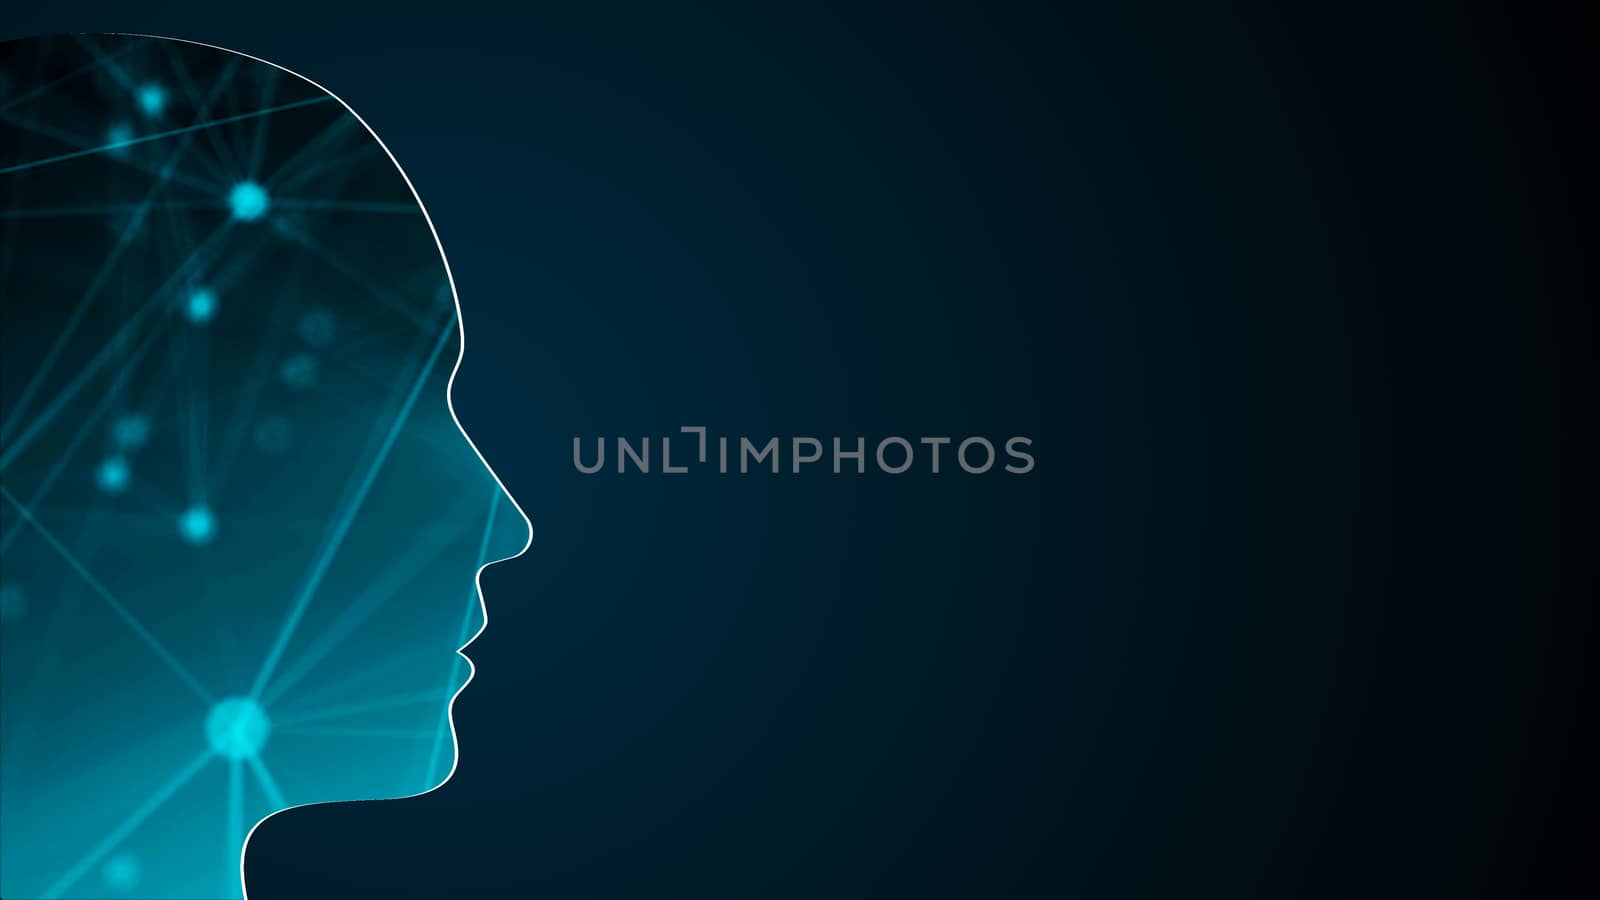 Abstract background with human head. Technology concept backdrop. 3d rendering digital background